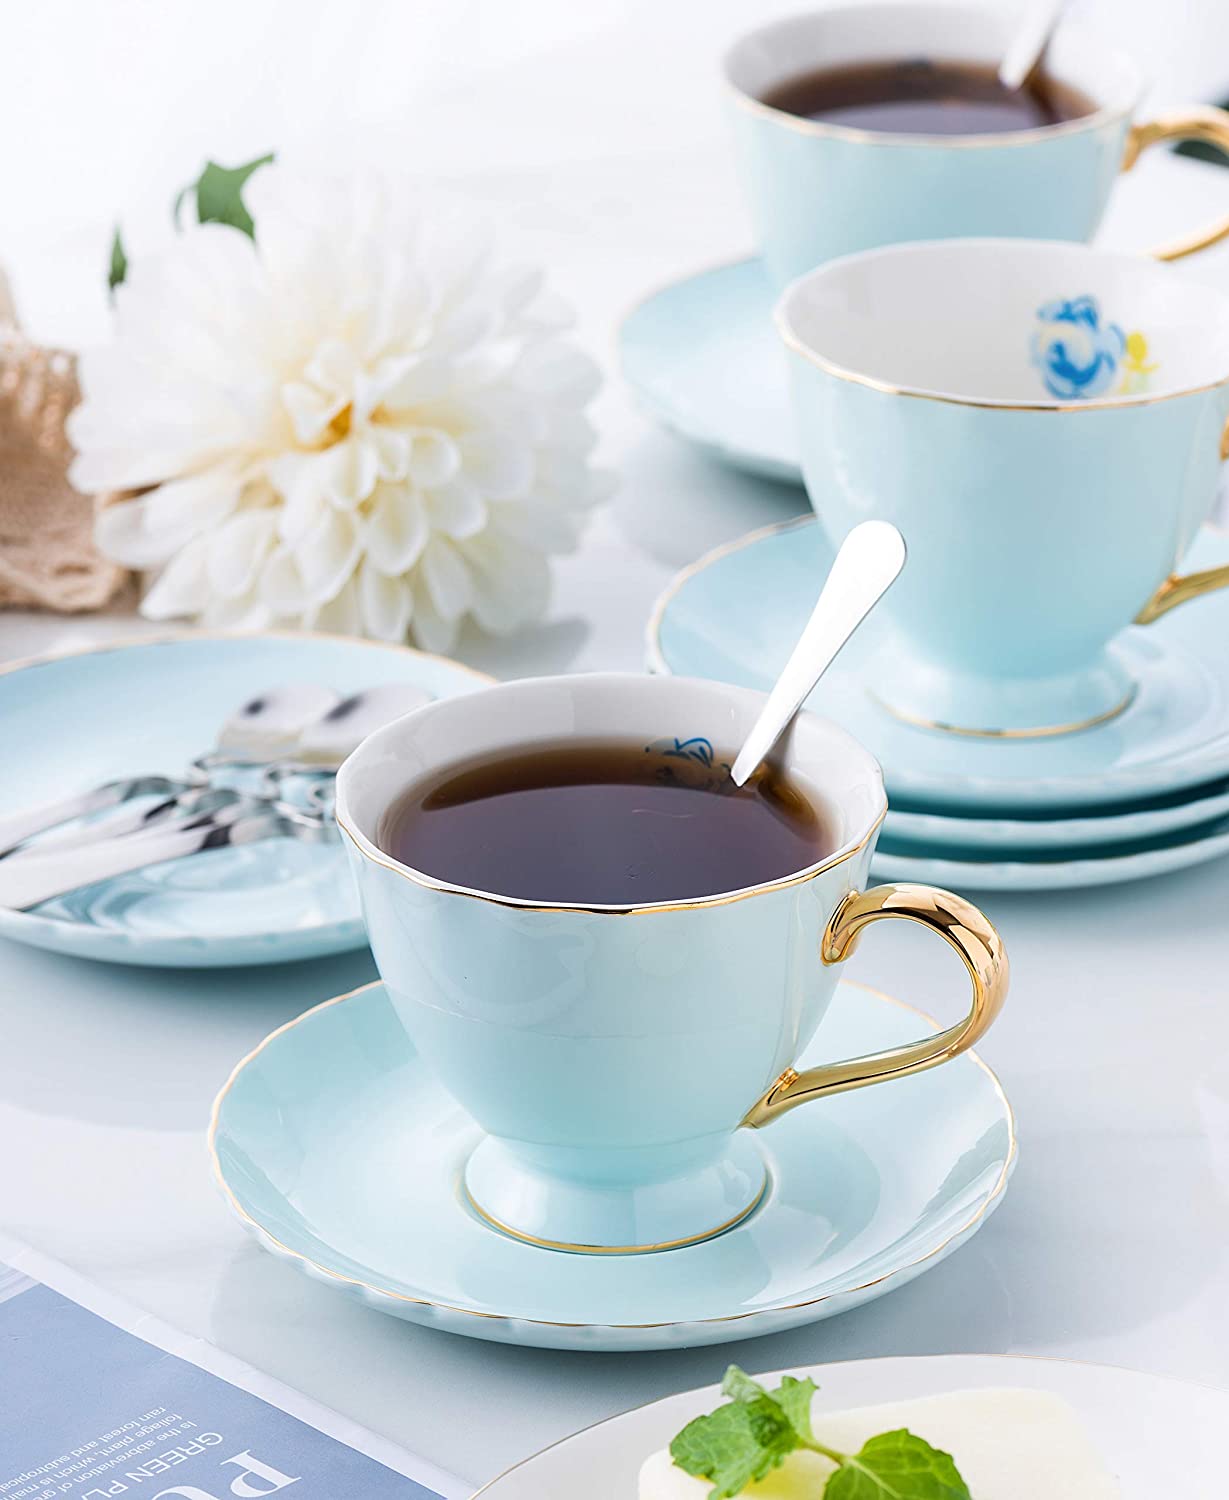 Jusalpha® Fine China Tea Cup and Saucer Coffee Cup Set with Saucer and Spoon Set of 6 (FD-TCS02 blue (6), 7oz)